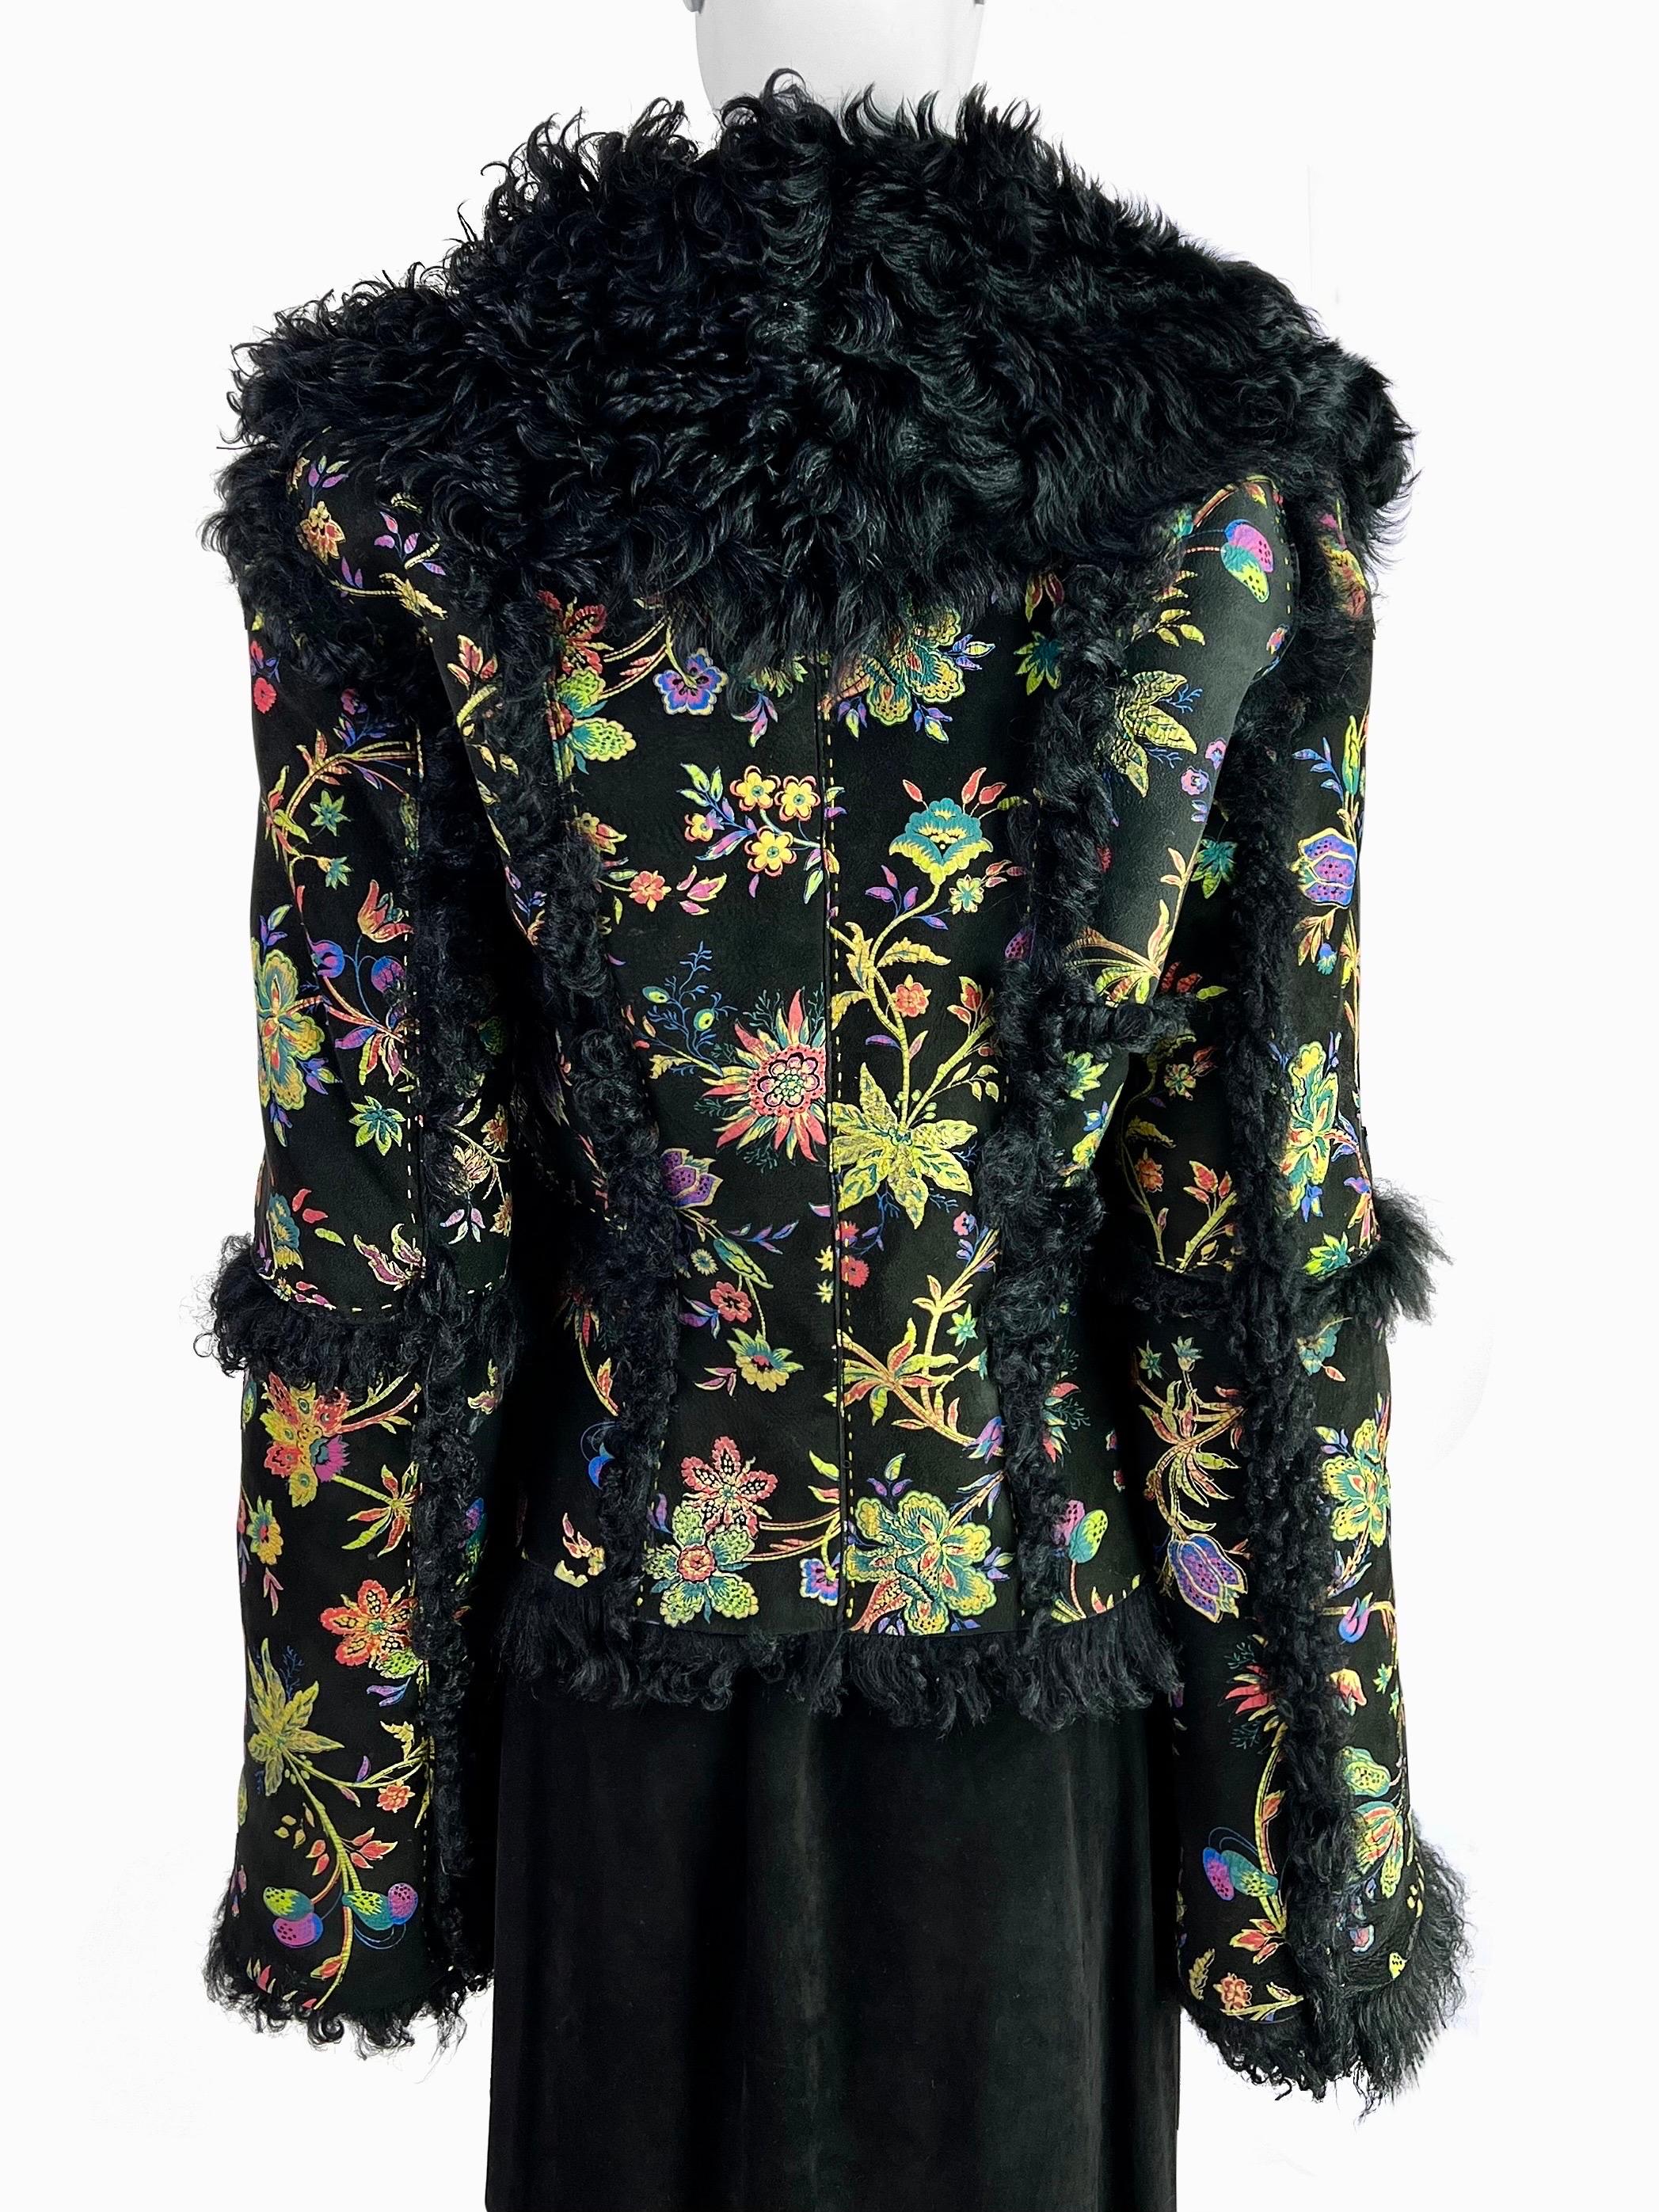 Roberto Cavalli Fall 1999 Hand-painted Flower Shearling Jacket For Sale 4